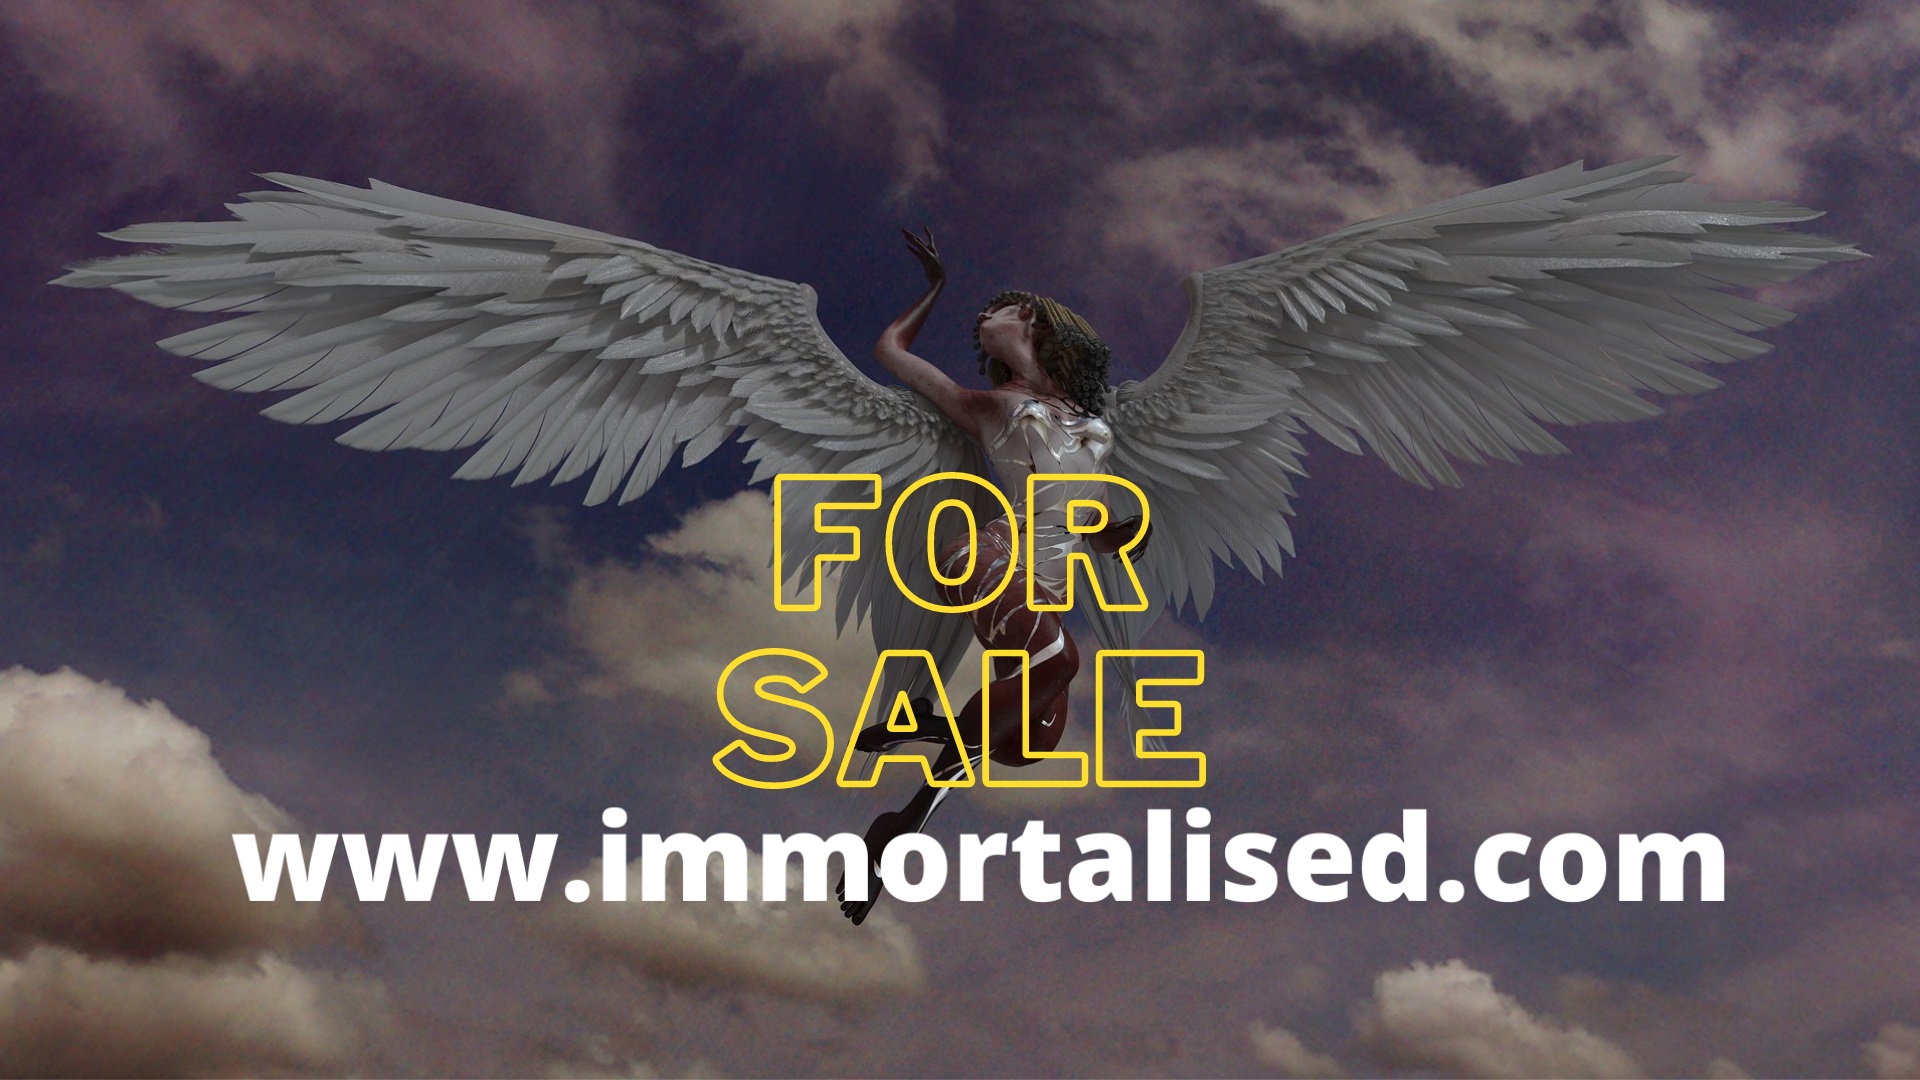 an immortalised angel in heaven memorial jewellery domain available